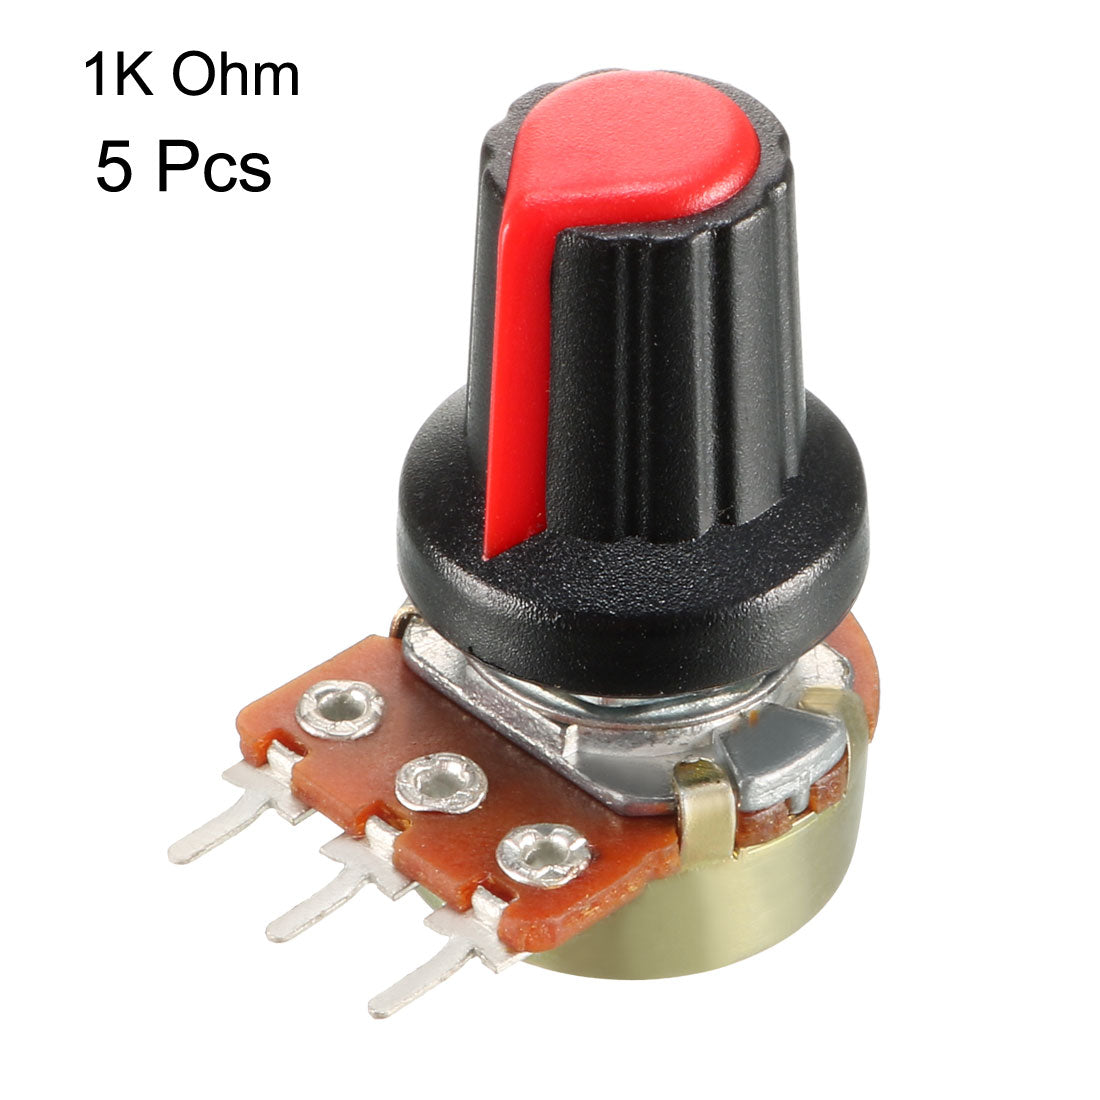 uxcell Uxcell 5Pcs 1K Ohm Variable Resistors Single Turn Rotary Carbon Film Taper Potentiometer with Knobs